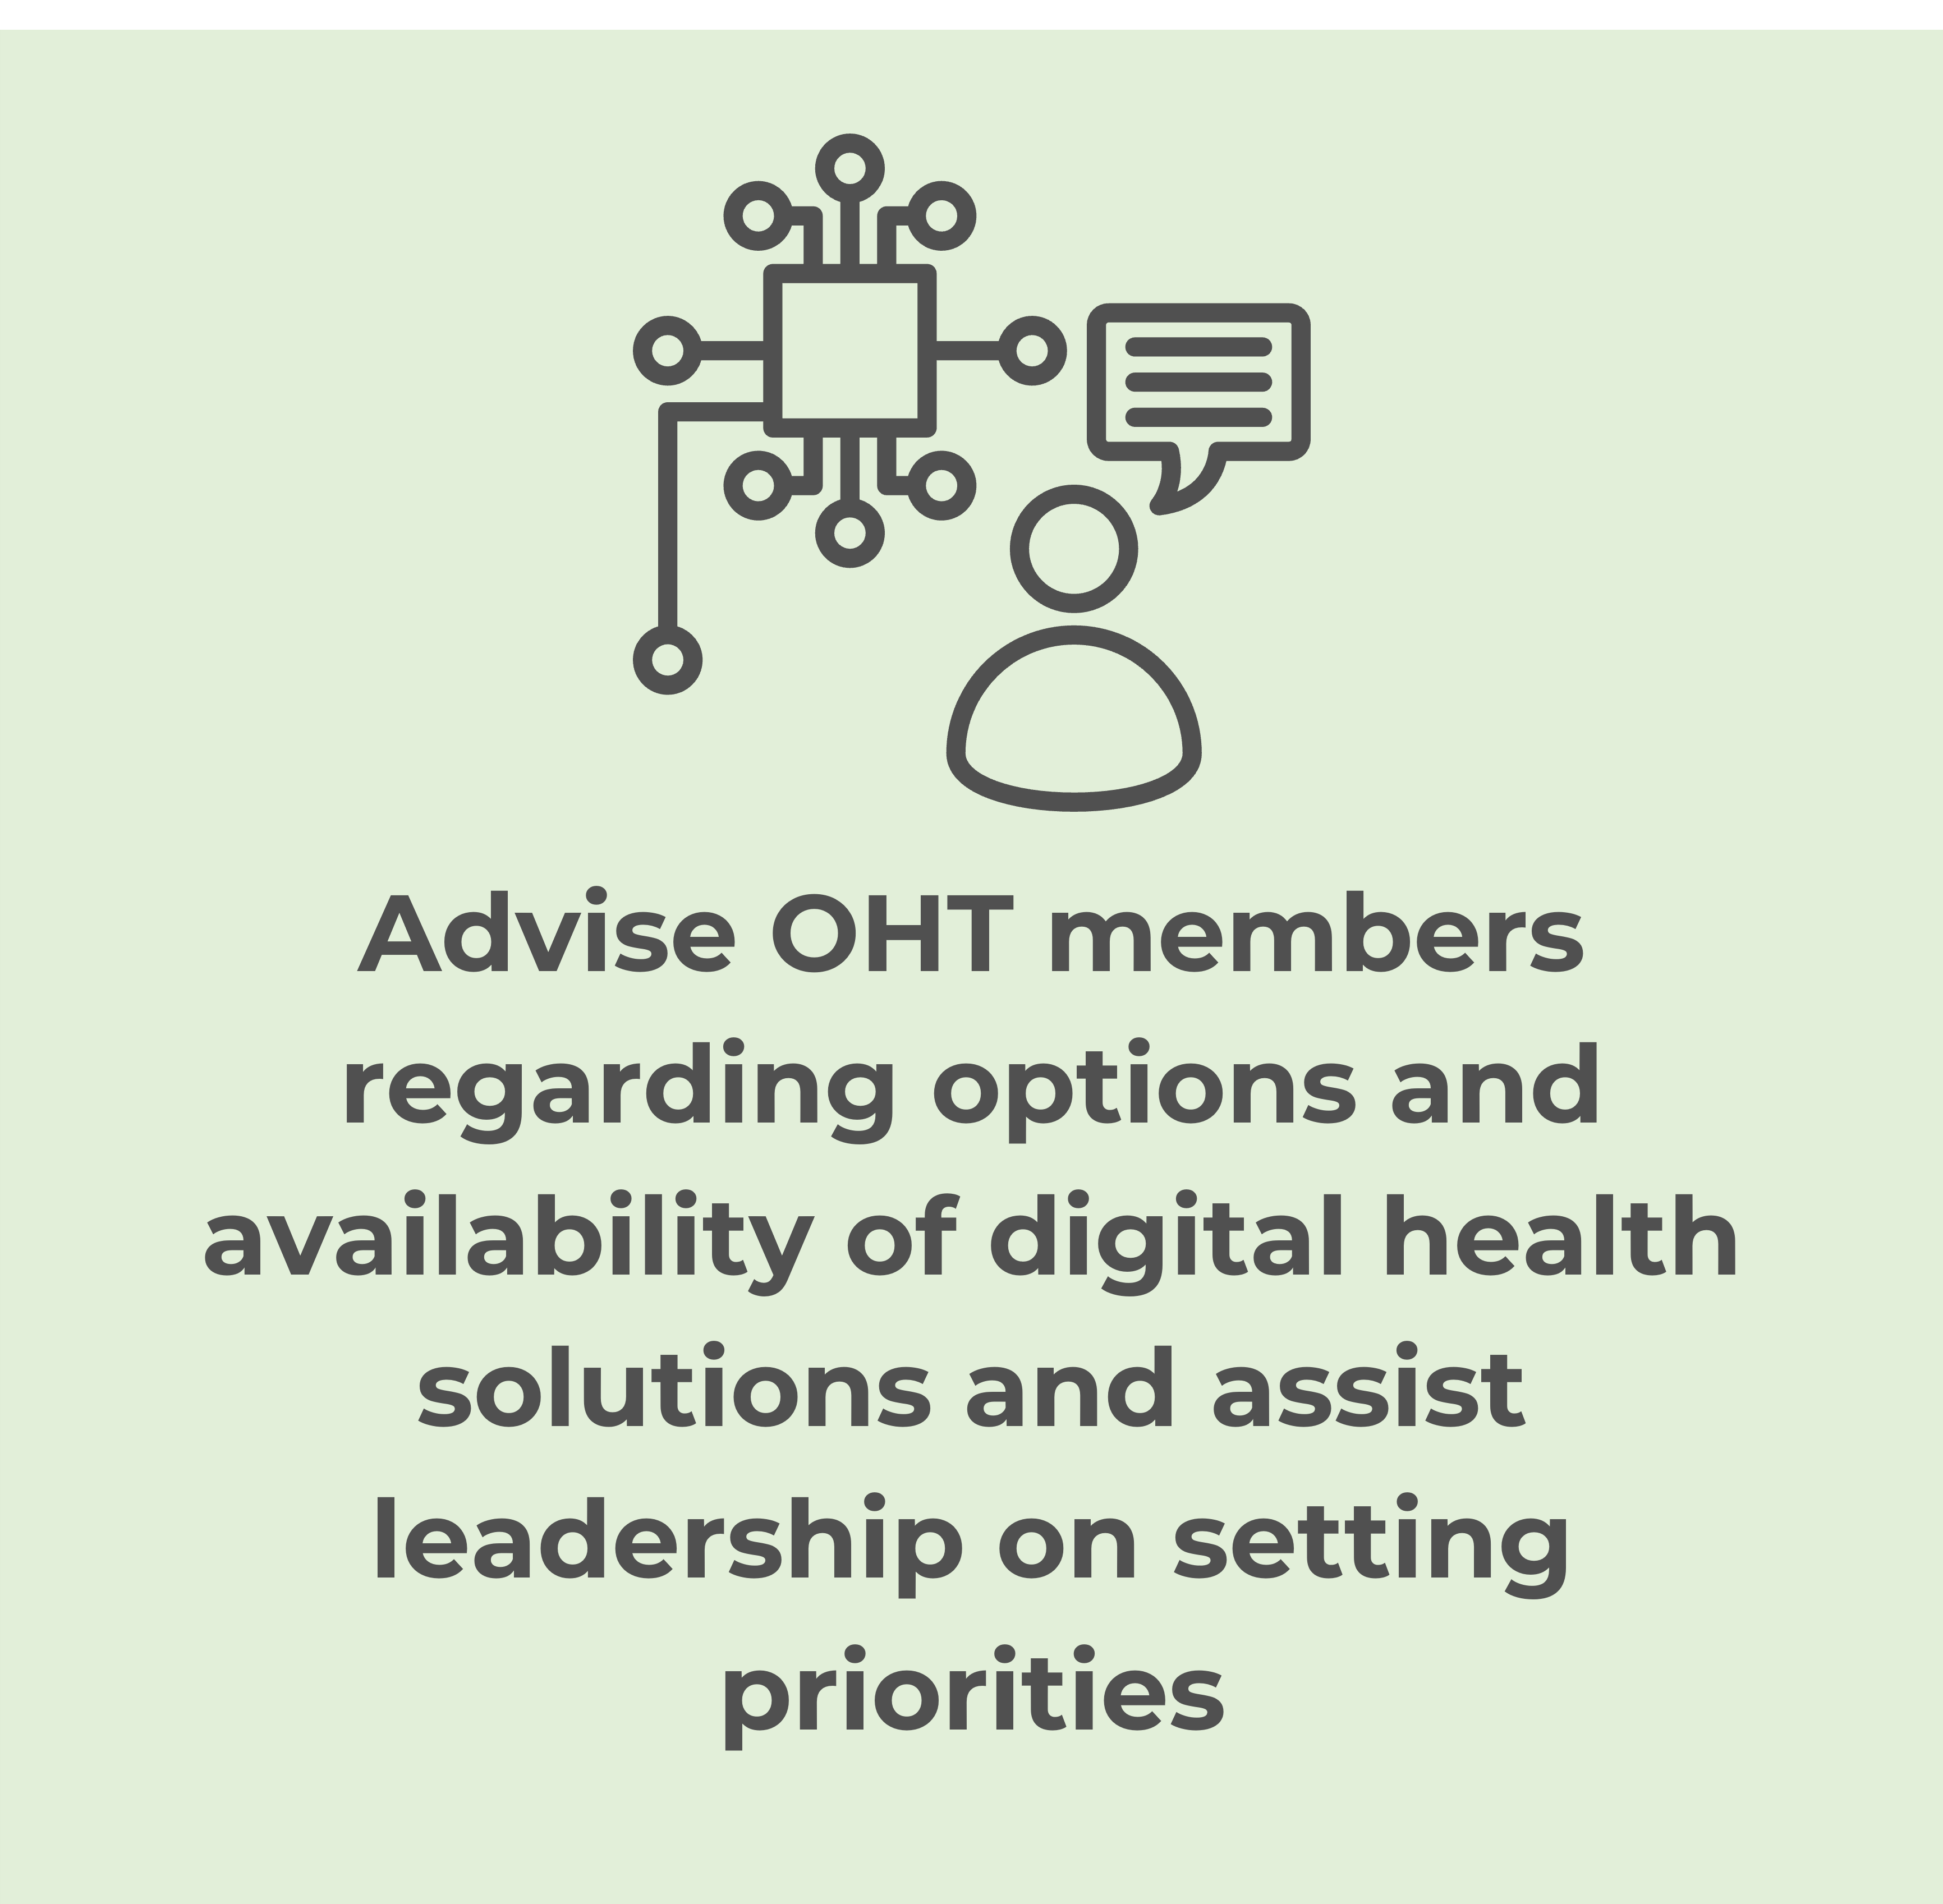 Advise OHT members regarding options and availability of digital health solutions and assist leadership on setting priorities